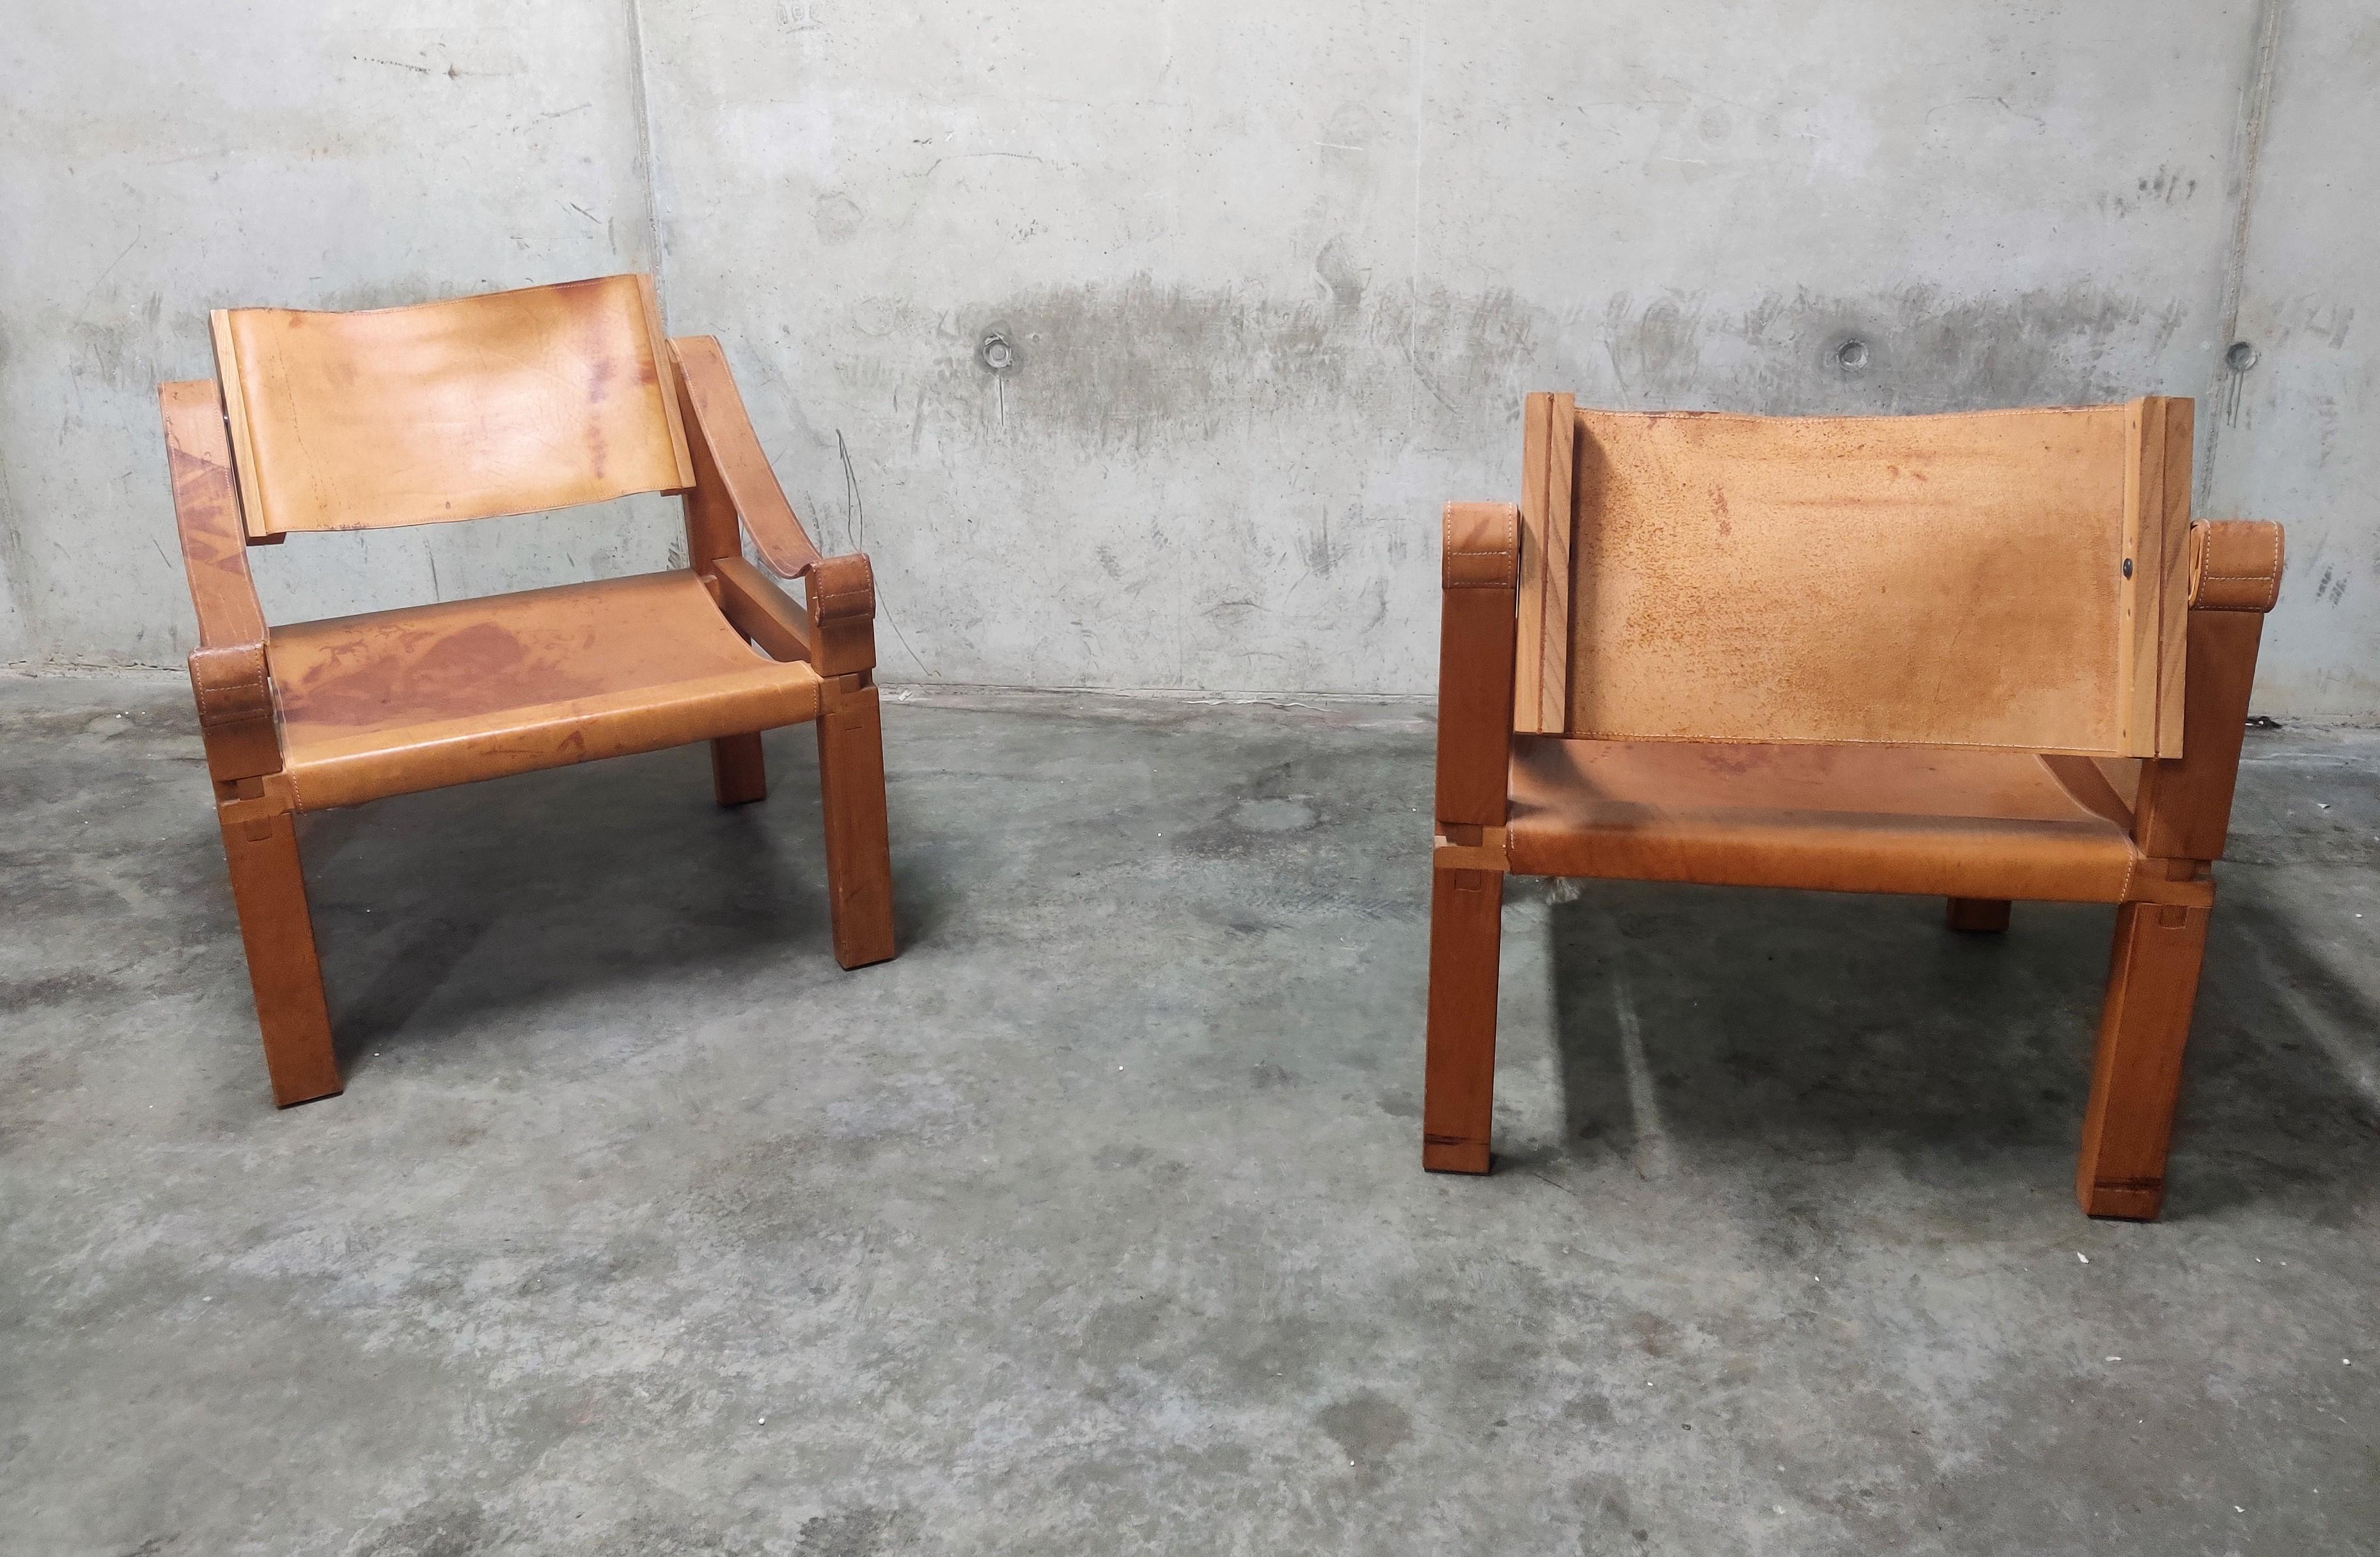 Pair of Pierre Chapo S10 easy chairs in cognac leather and oak.

Designed in the 1960s and produced in solid elm and cognac leather, the S10 chair is one of the most elemental works in Chapo's oeuvre with a straight forward, simple design,